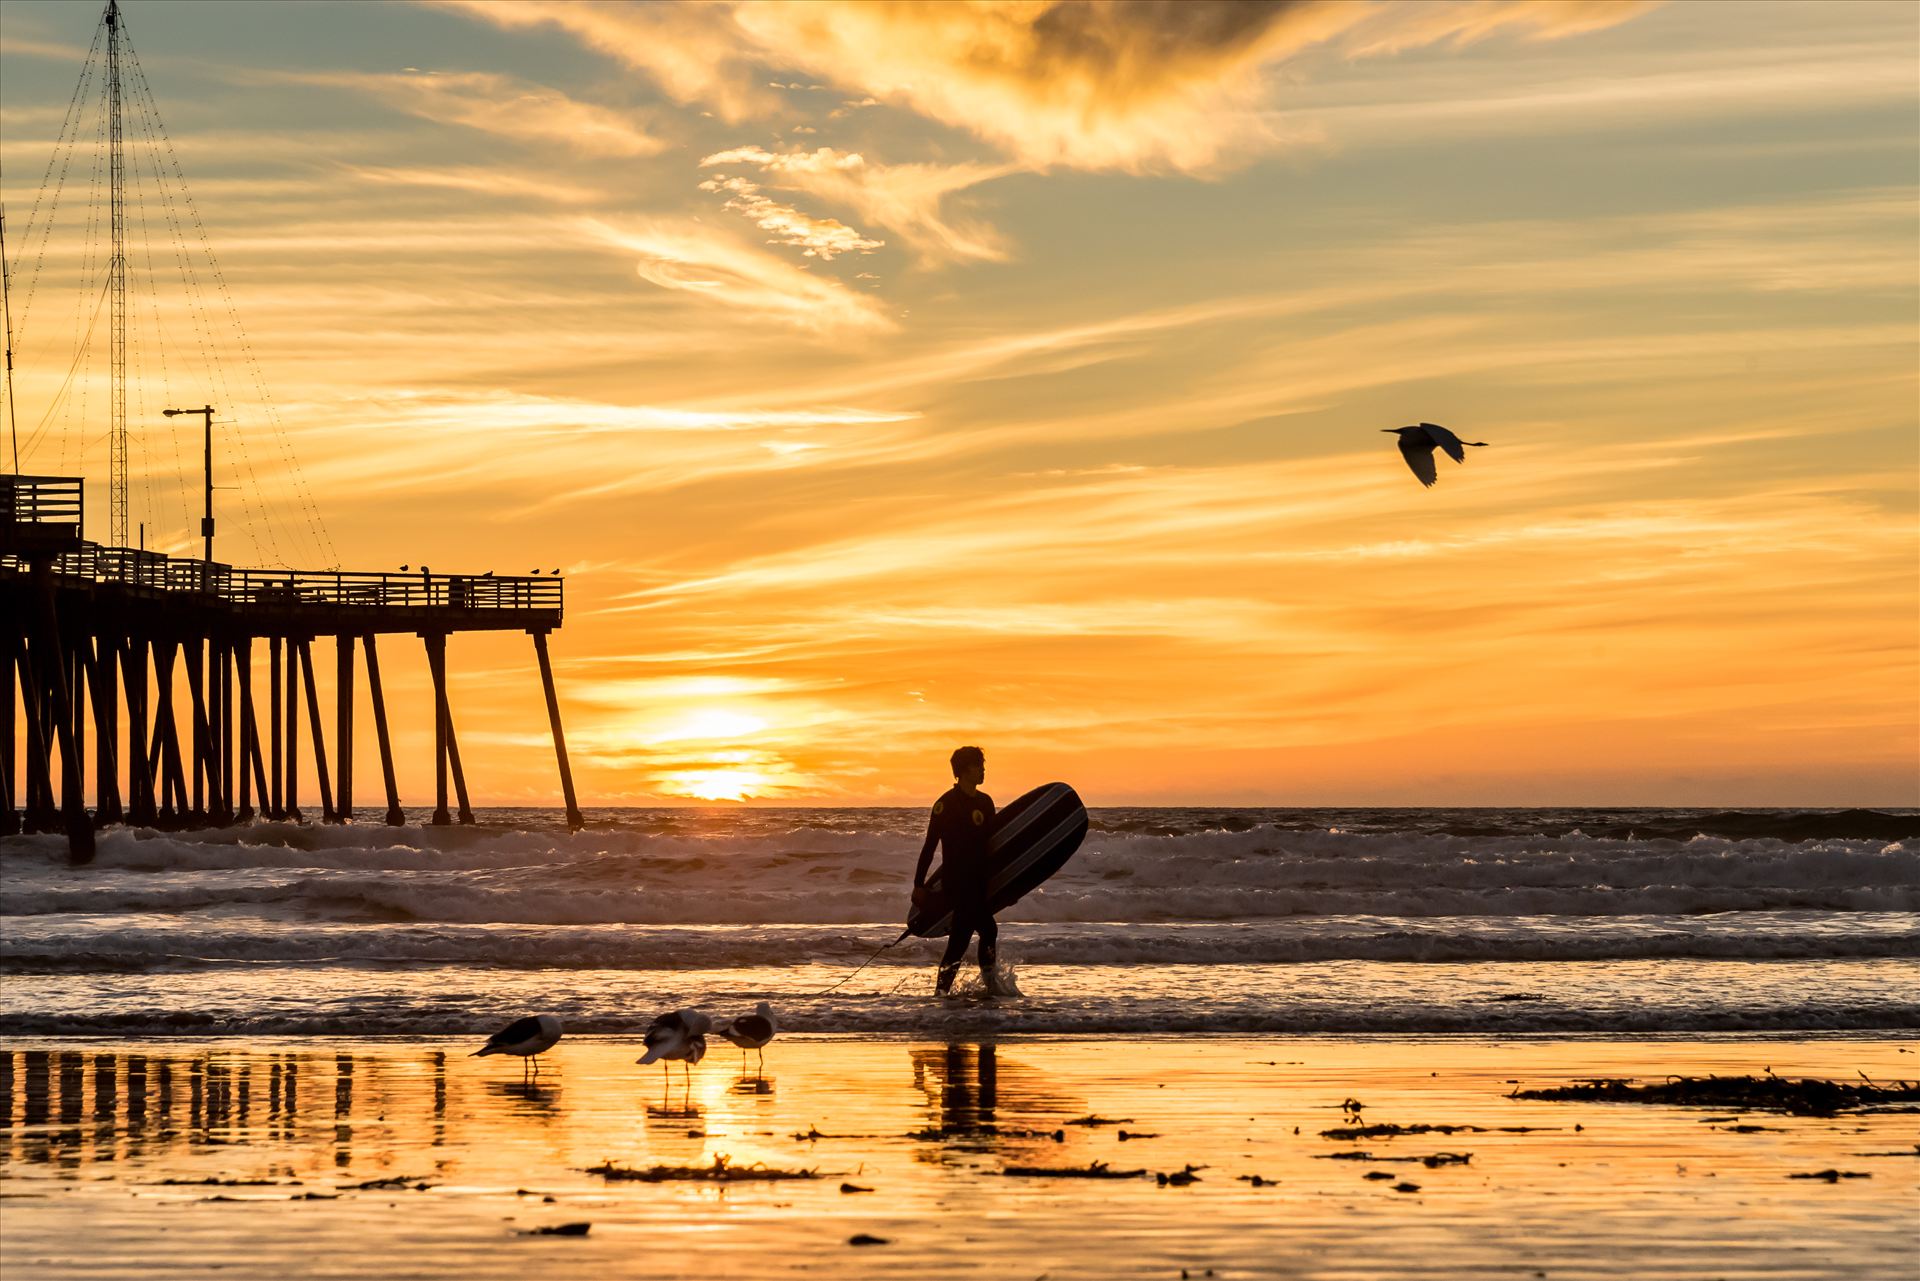 Sunset Surfing and a Flying Bird.jpg  by Sarah Williams